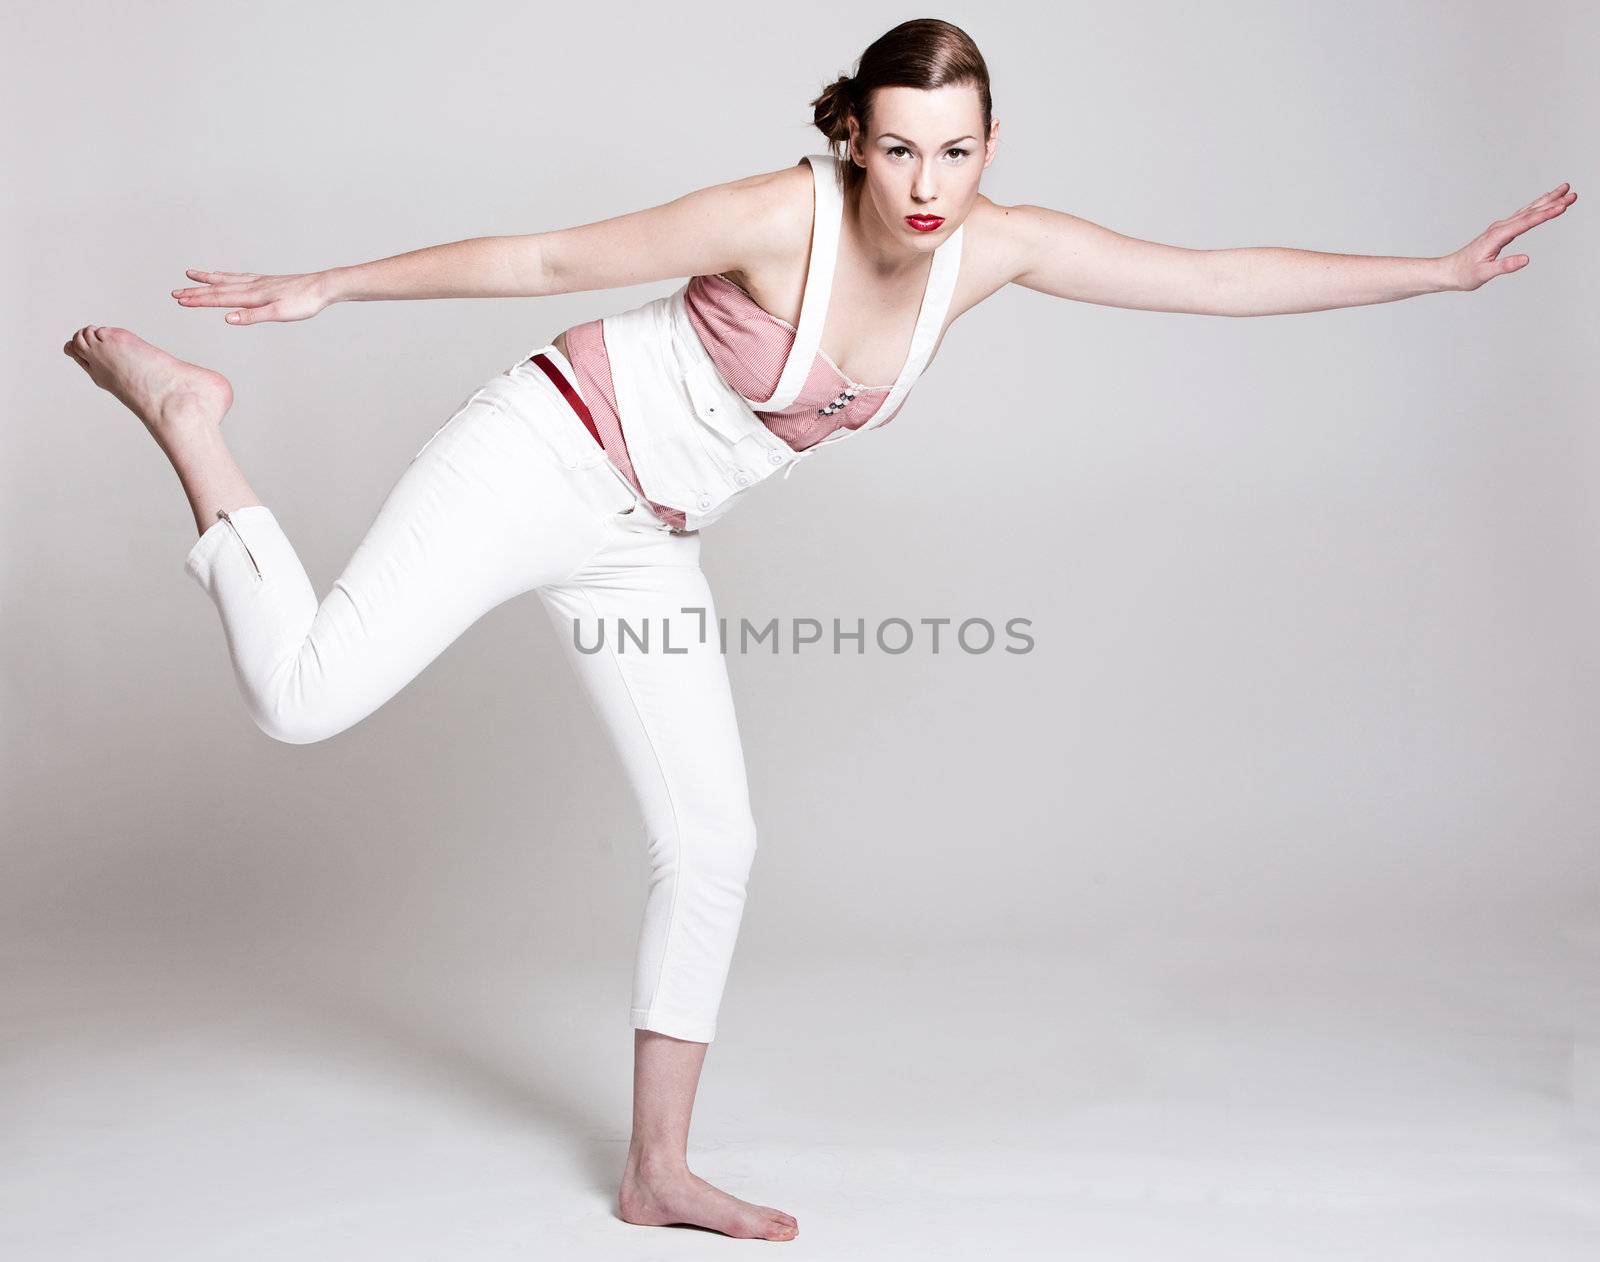 Beautiful woman standing on one leg and in balance